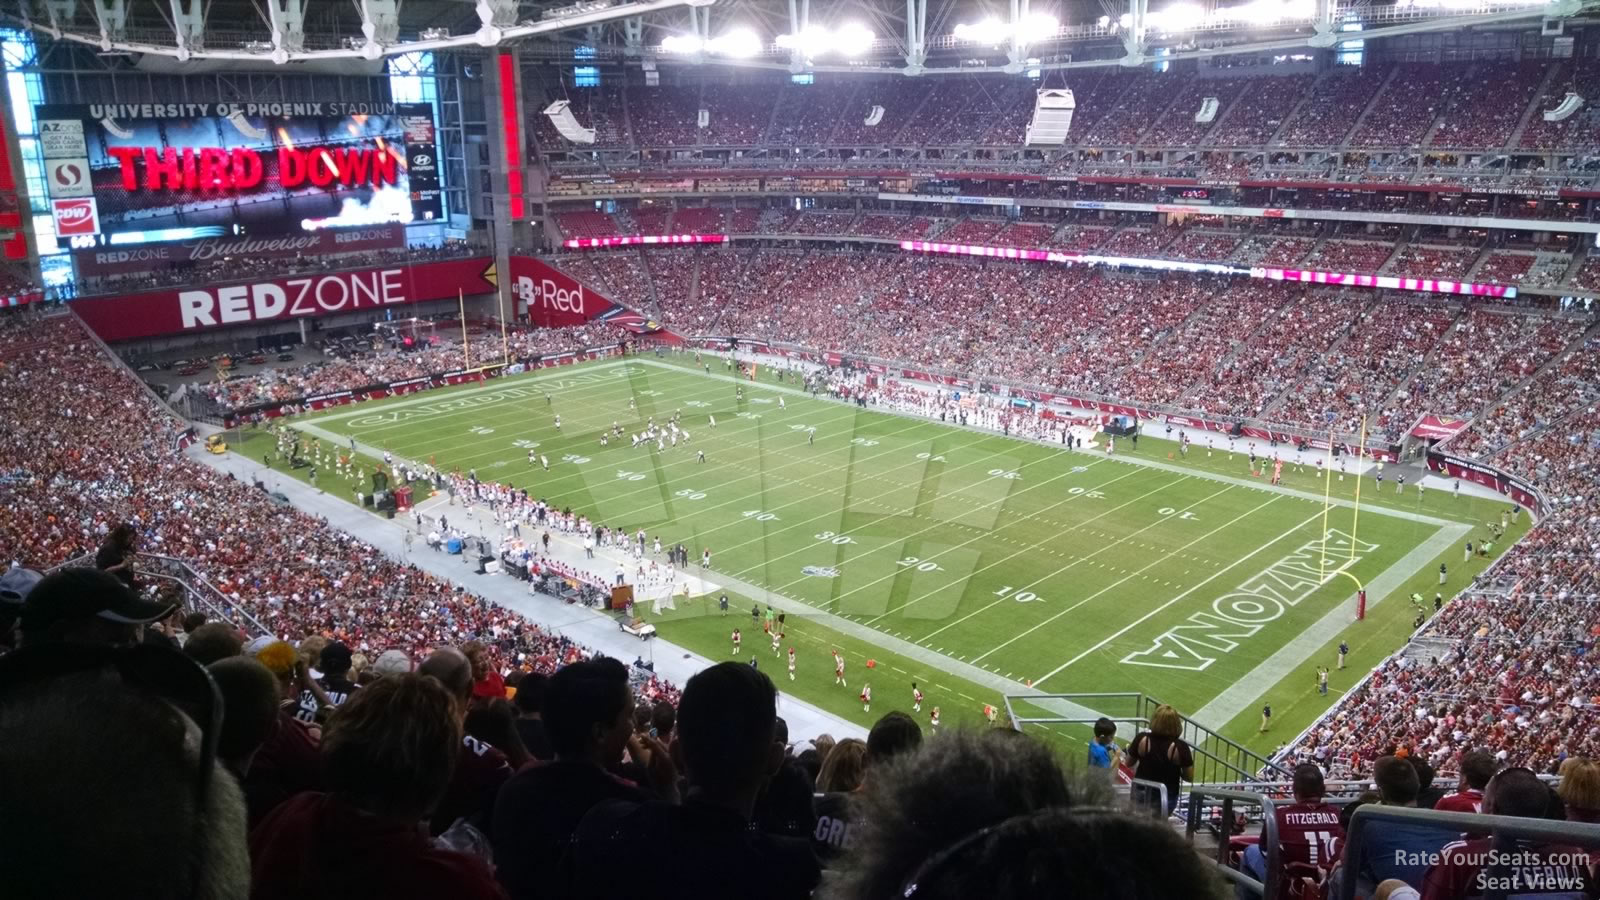 View From Section 436 Row 11